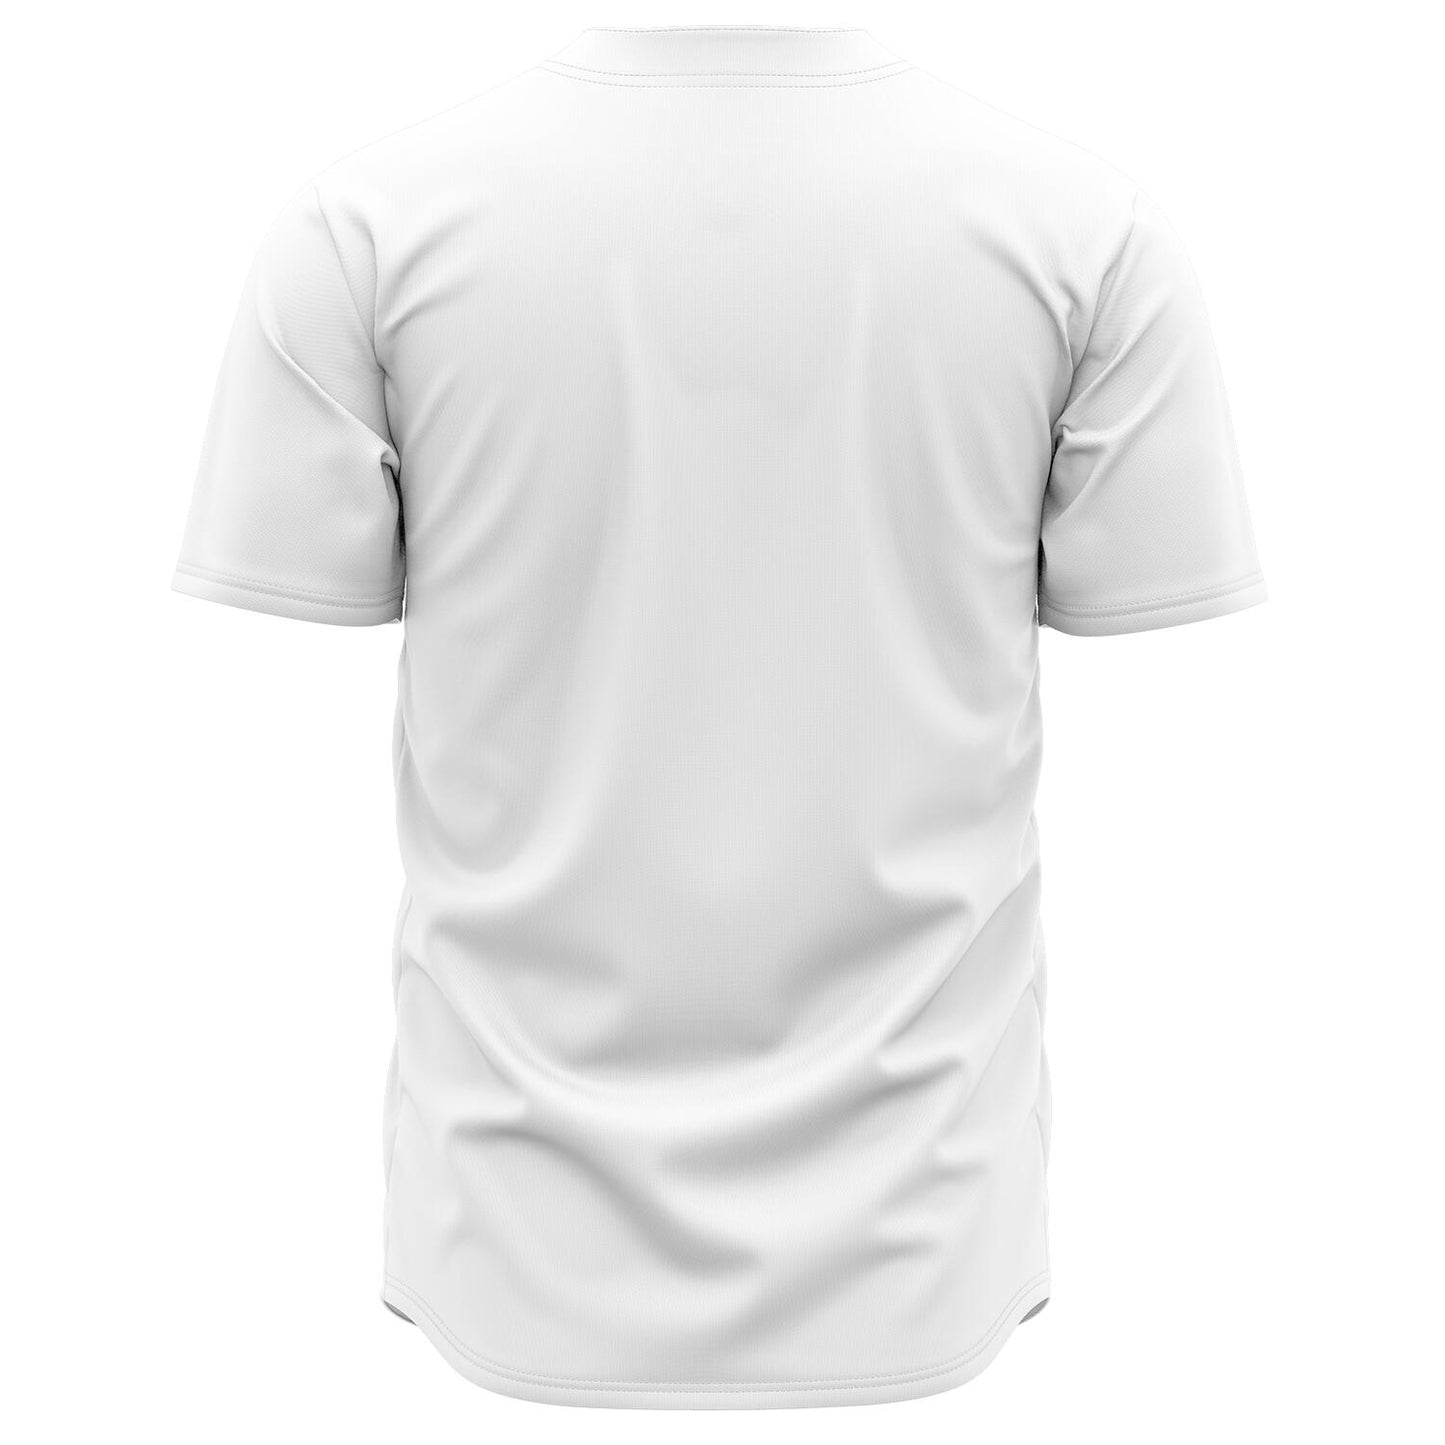 Custom Plain White Gamer Jersey (button down up to 5XL)